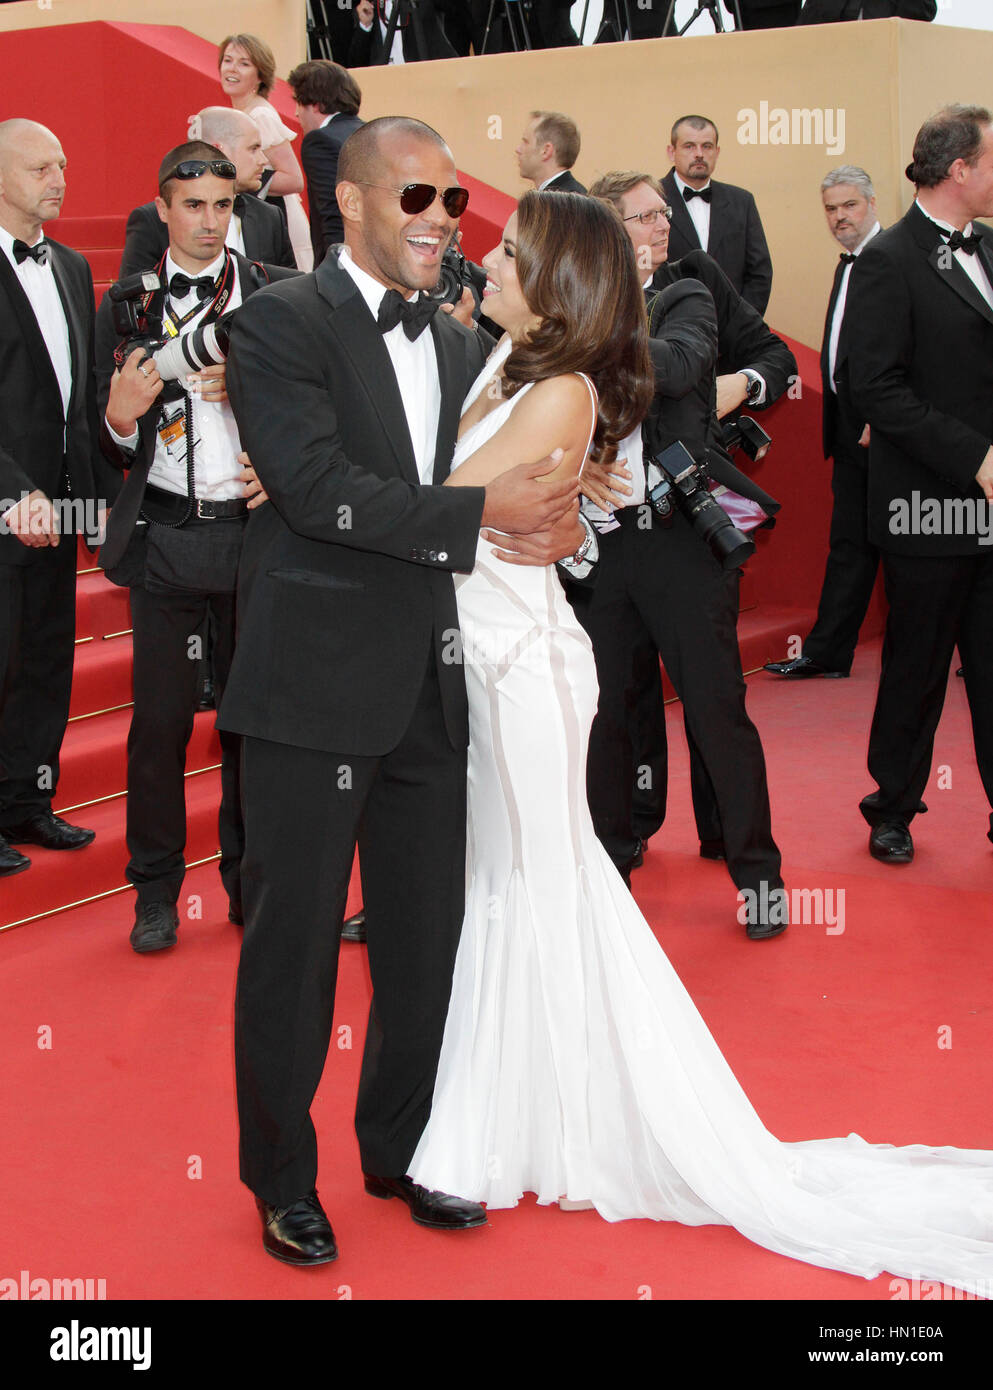 Eva Longoria hugs Amaury Nolasco at the premiere for the film, 'De rouille et d'os' at the 65th Cannes Film Festival in Cannes, France on May 17, 2012. Photo by Francis Specker Stock Photo